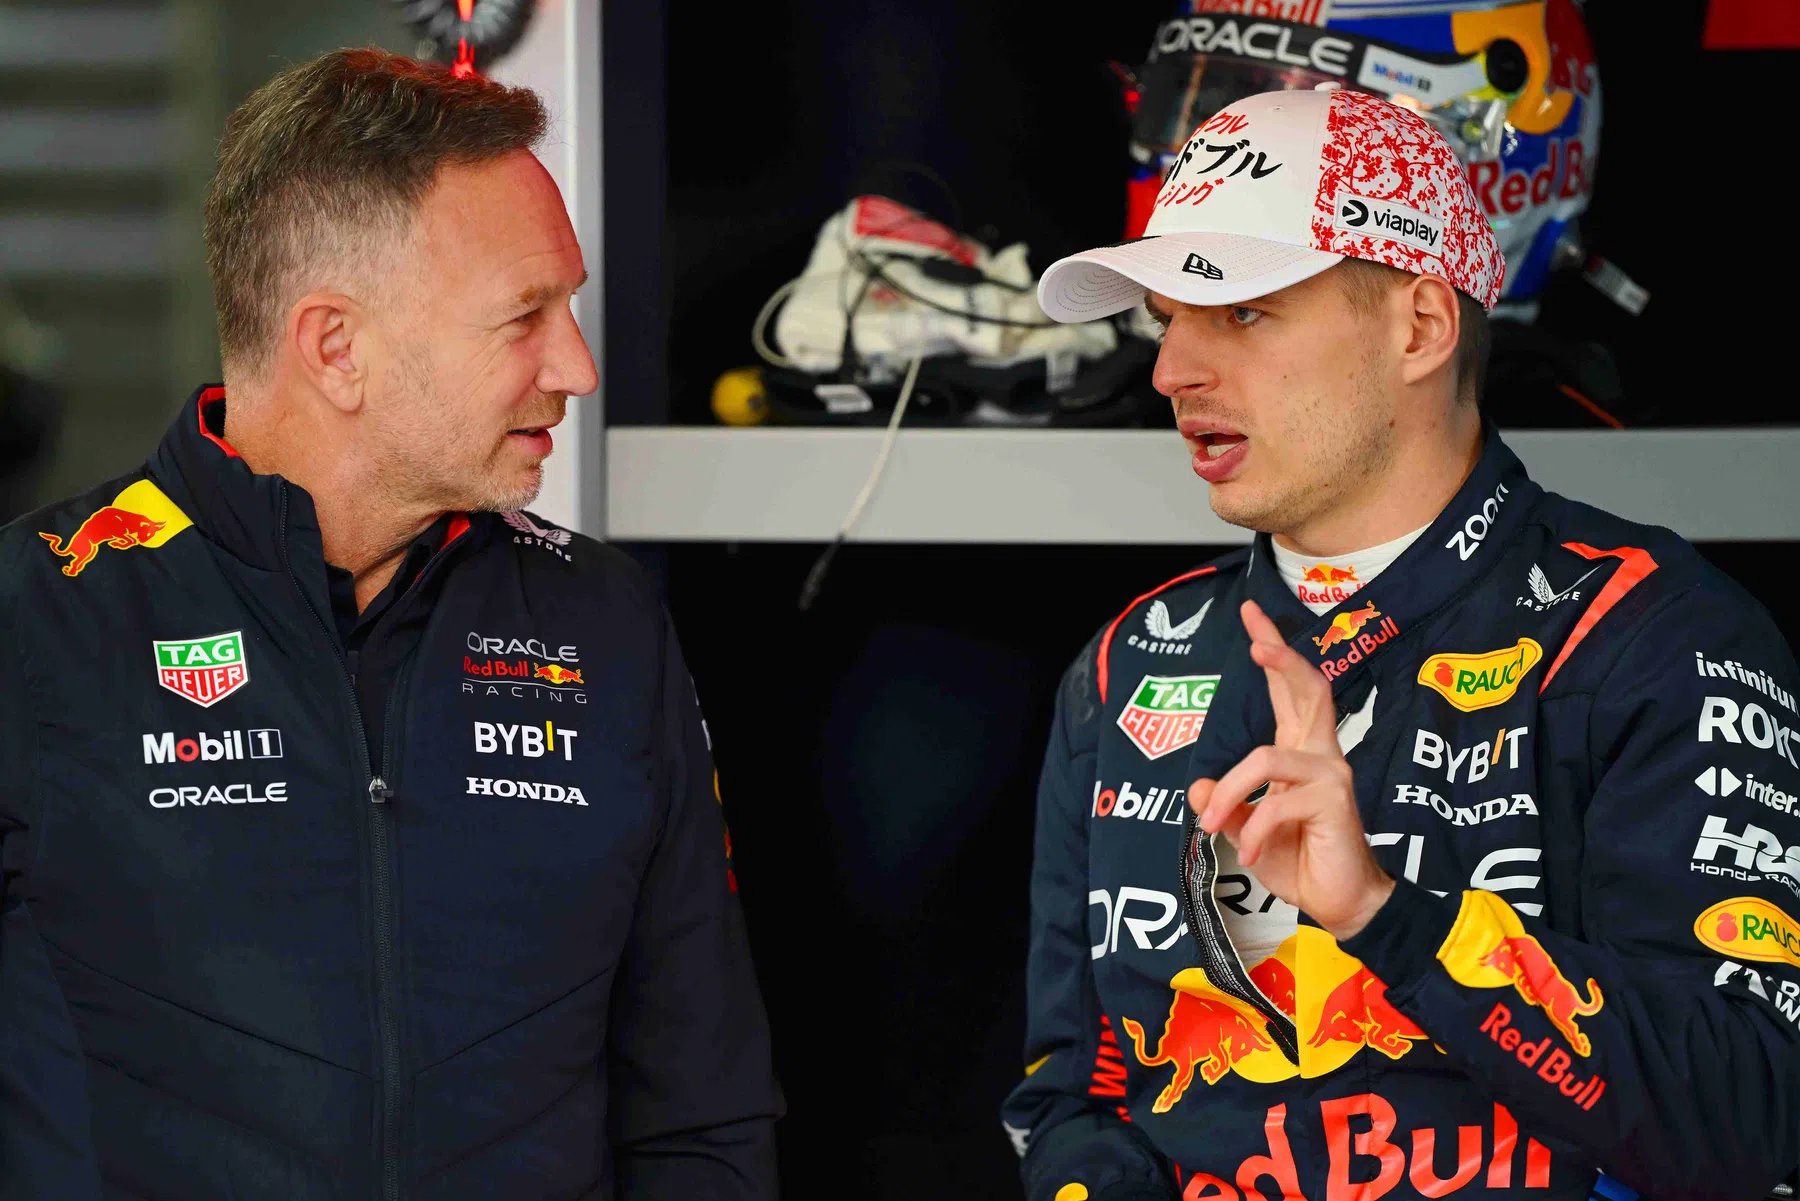 red bull does not seem to be coming up with updates for rb20 verstappen any time soon